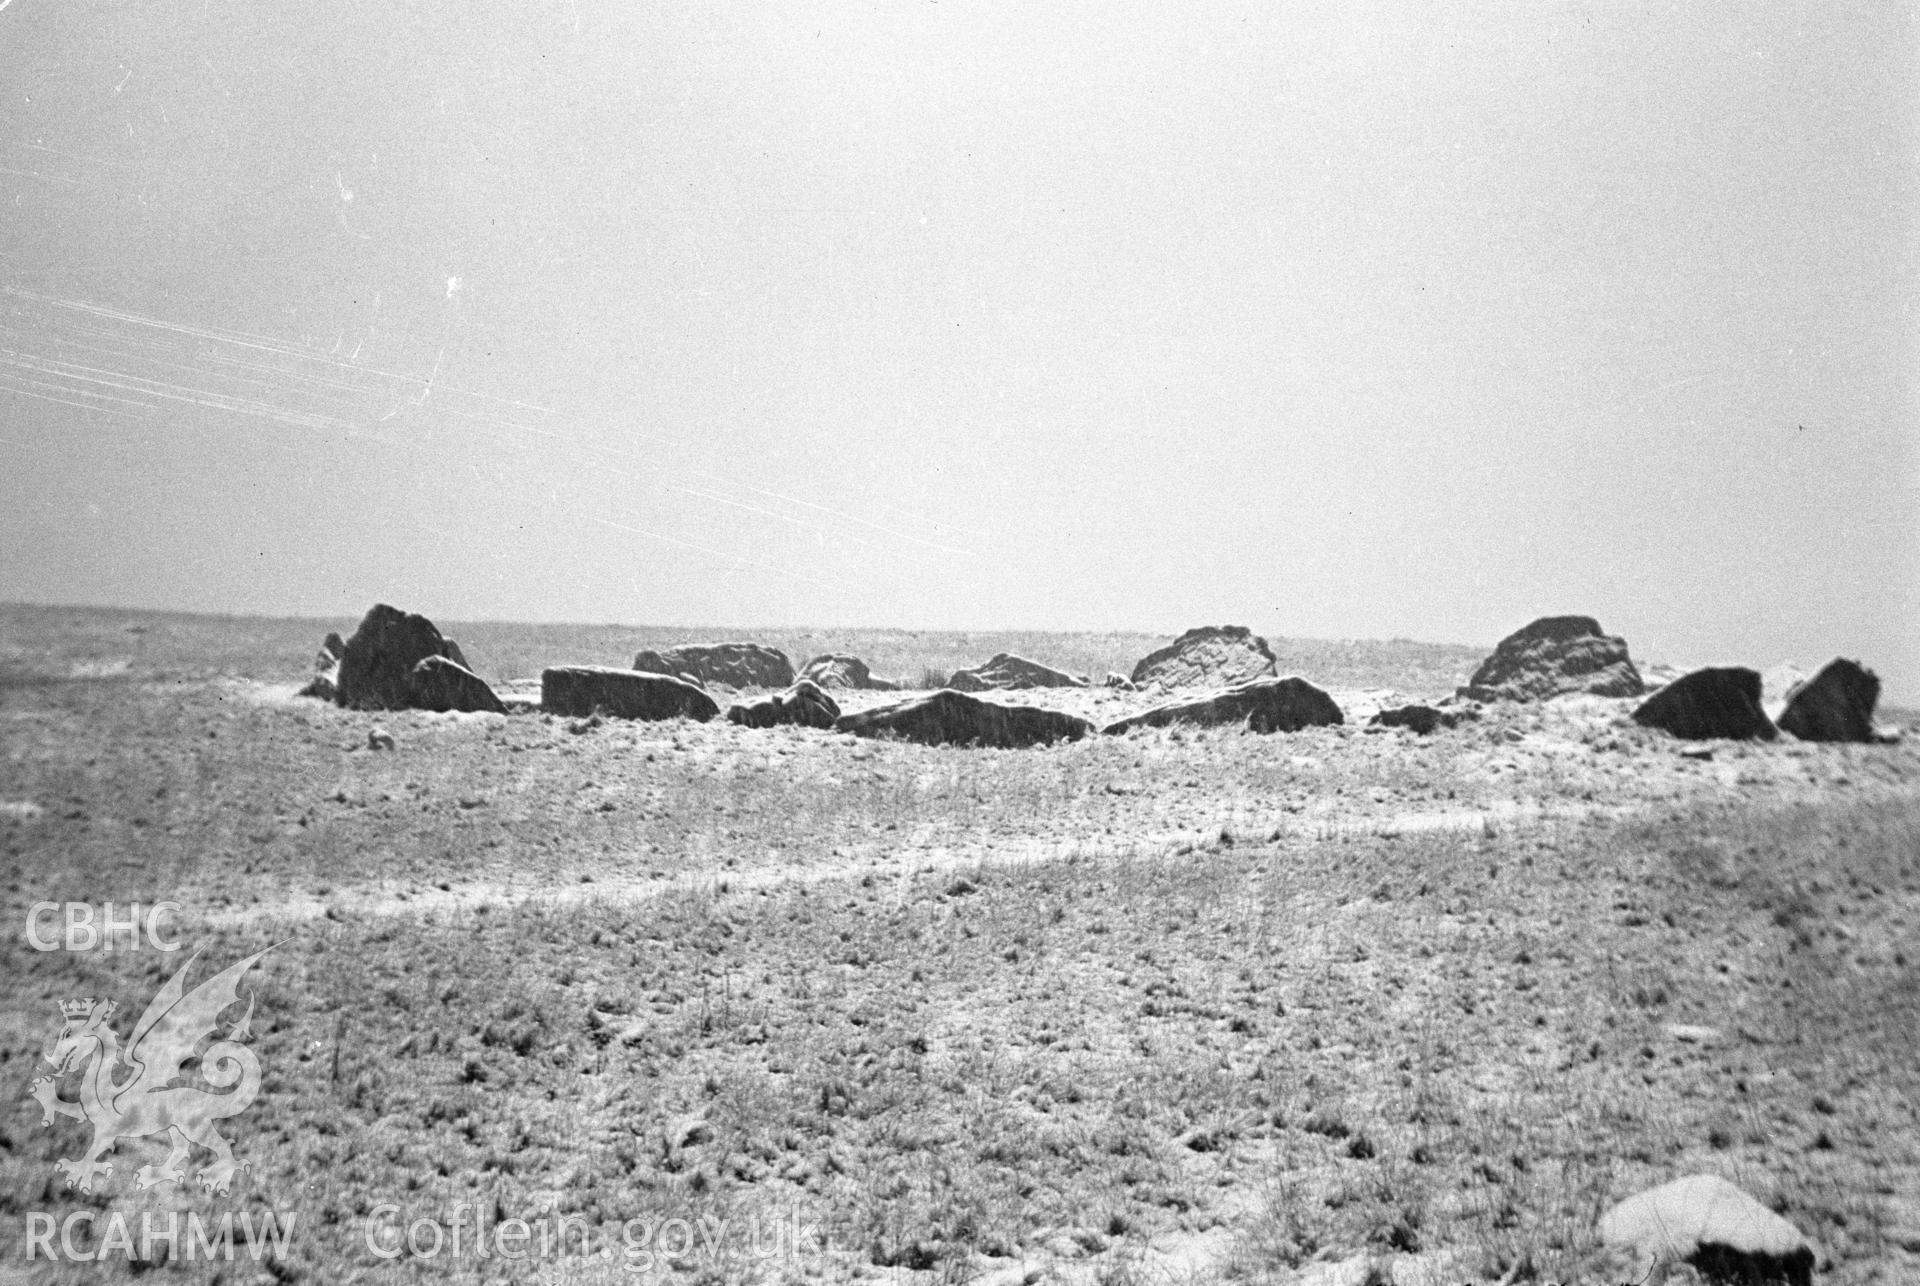 Digital copy of a nitrate negative showing view of Carn Flechart Stone Circle and Chambered Barrow.